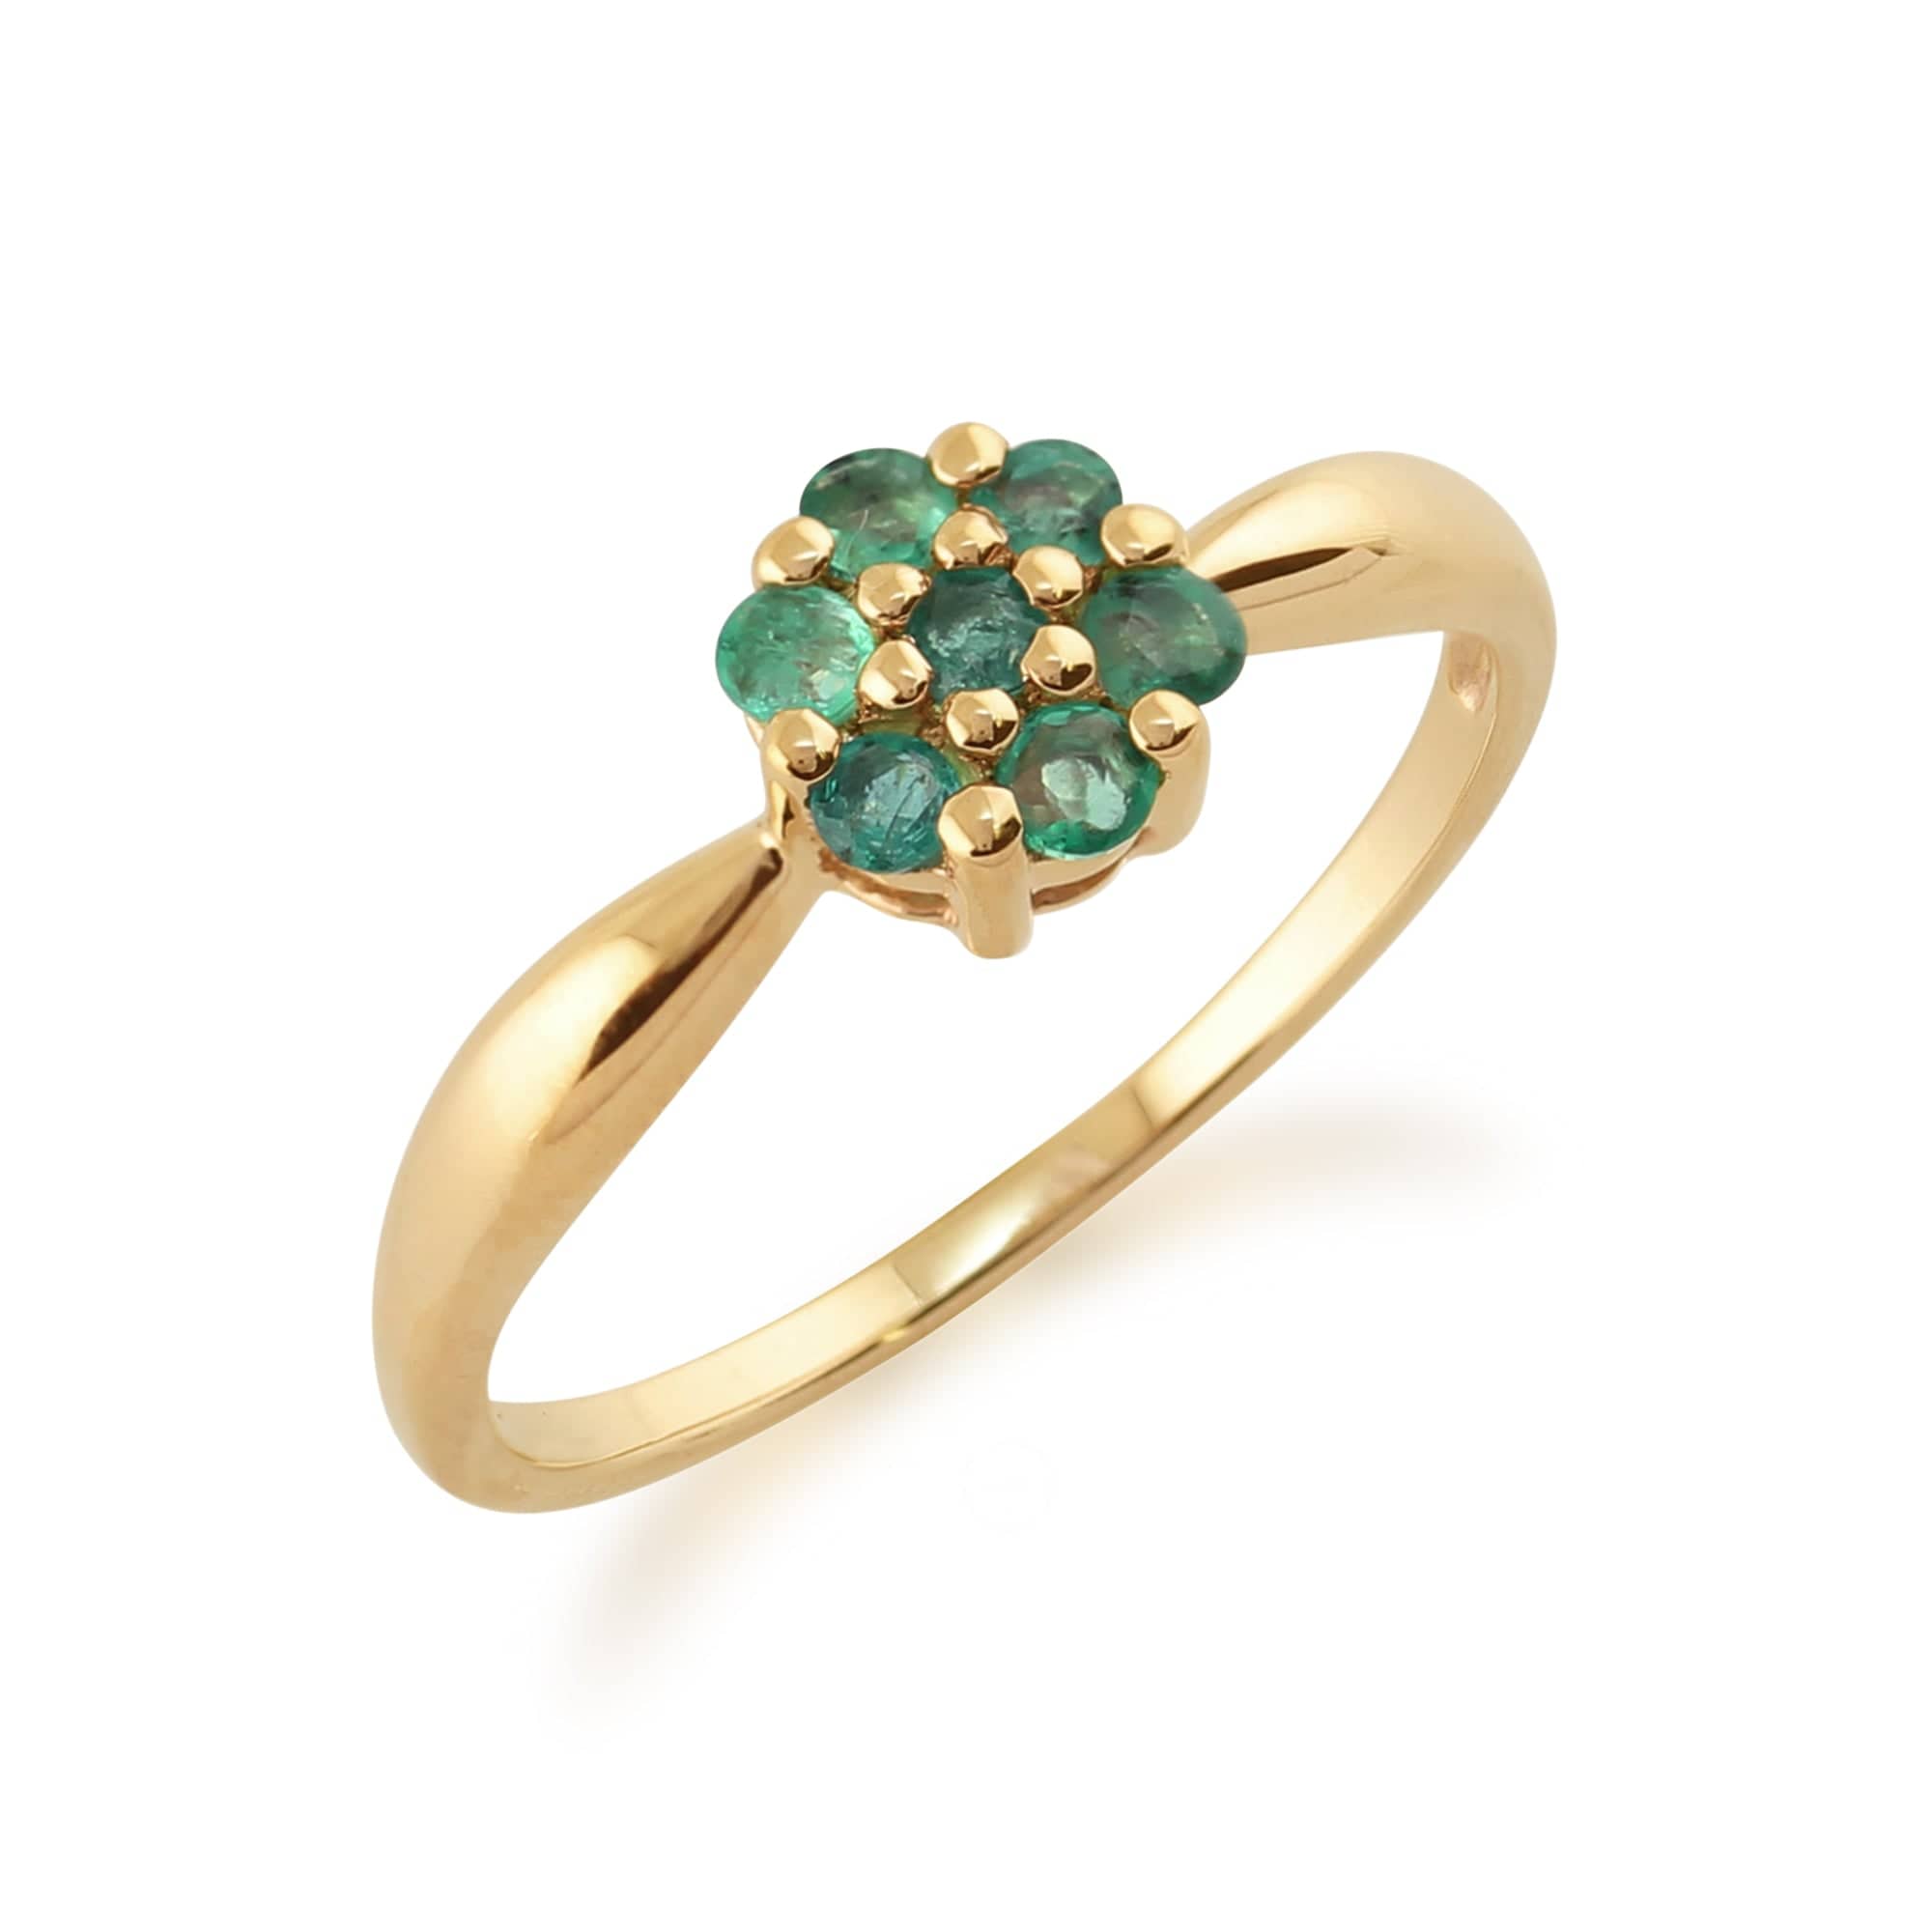 Floral Round Emerald Cluster Ring in 9ct Yellow Gold - Gemondo